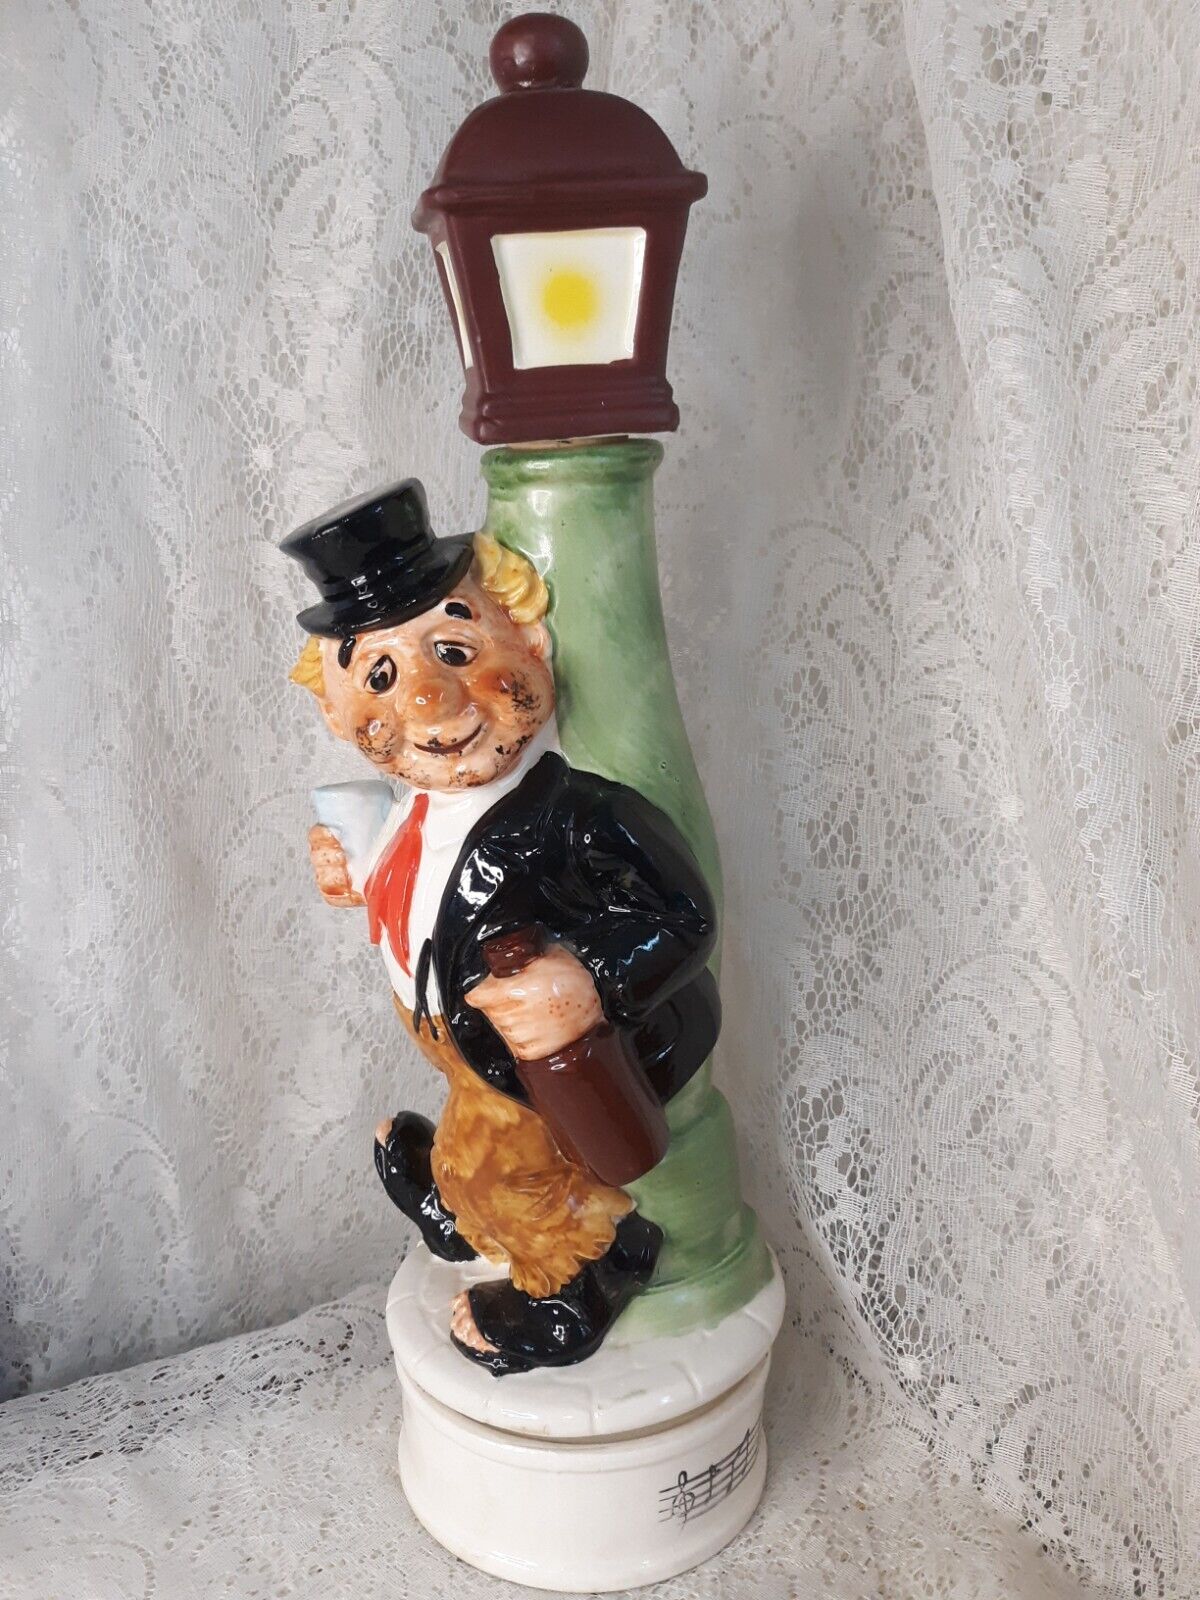 Vintage-Hobo Drunk Decanter Music box plays music and rotates Empty